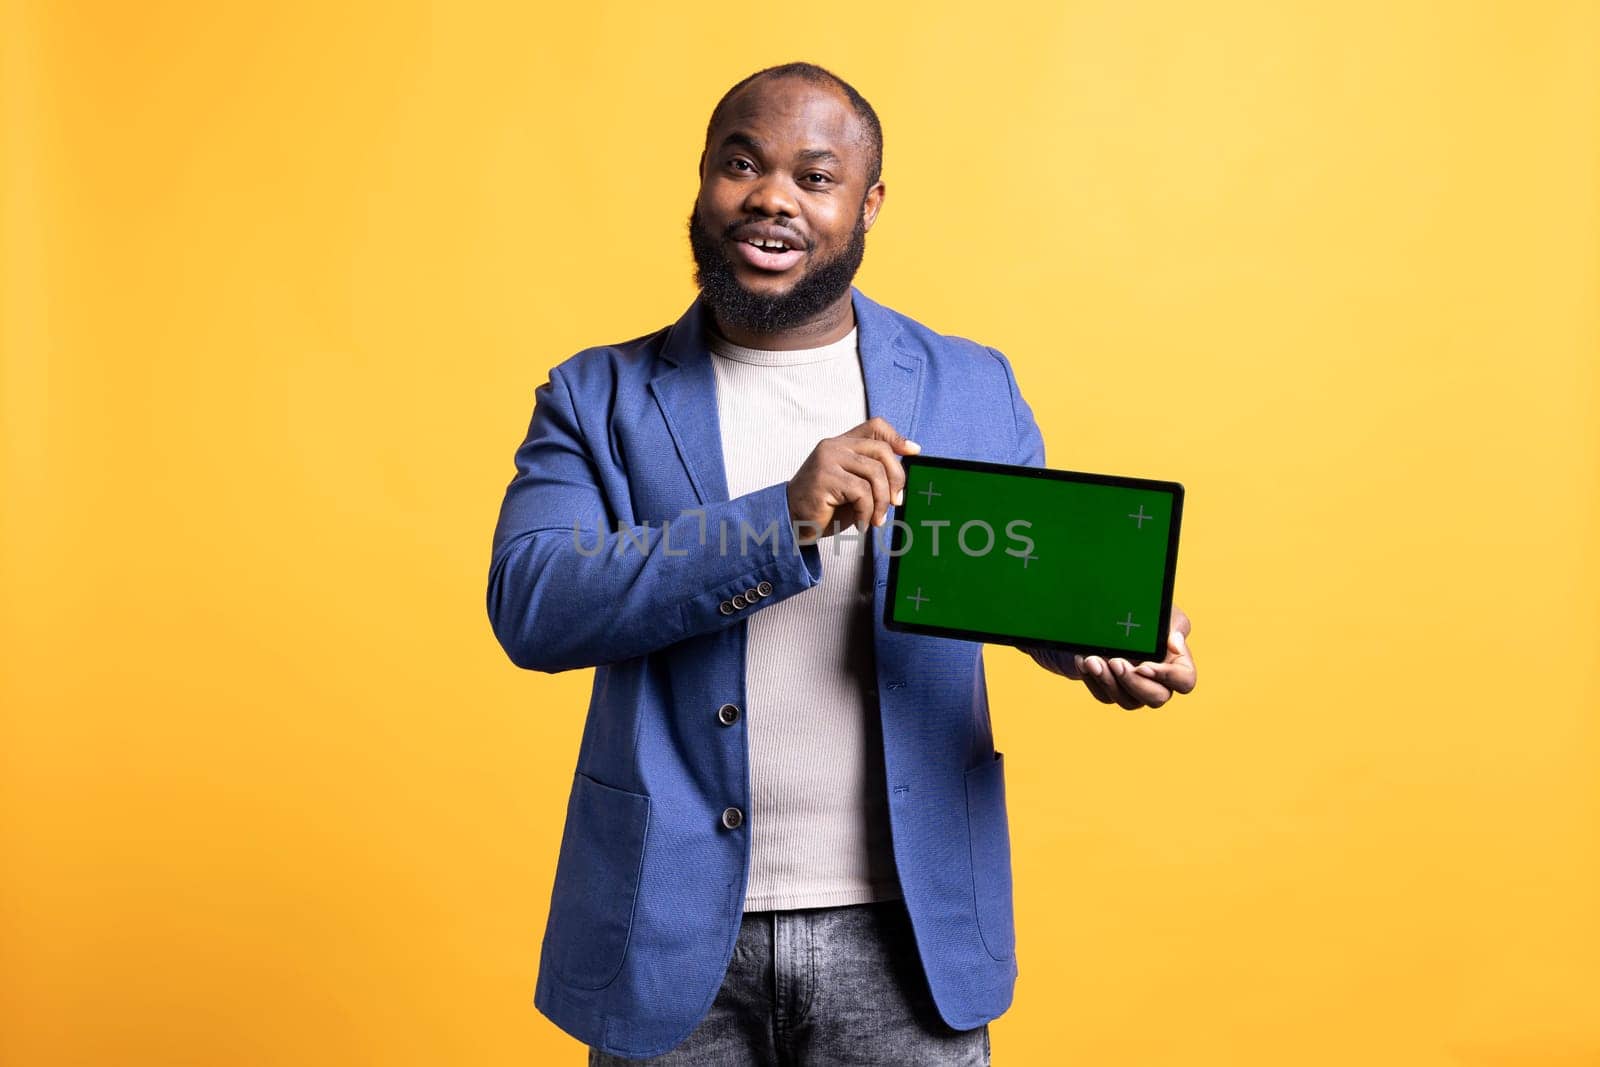 Jolly african american man presenting video on green screen tablet in landscape mode, studio background. Upbeat BIPOC person holding blank copy space chroma key device used for showcasing ads